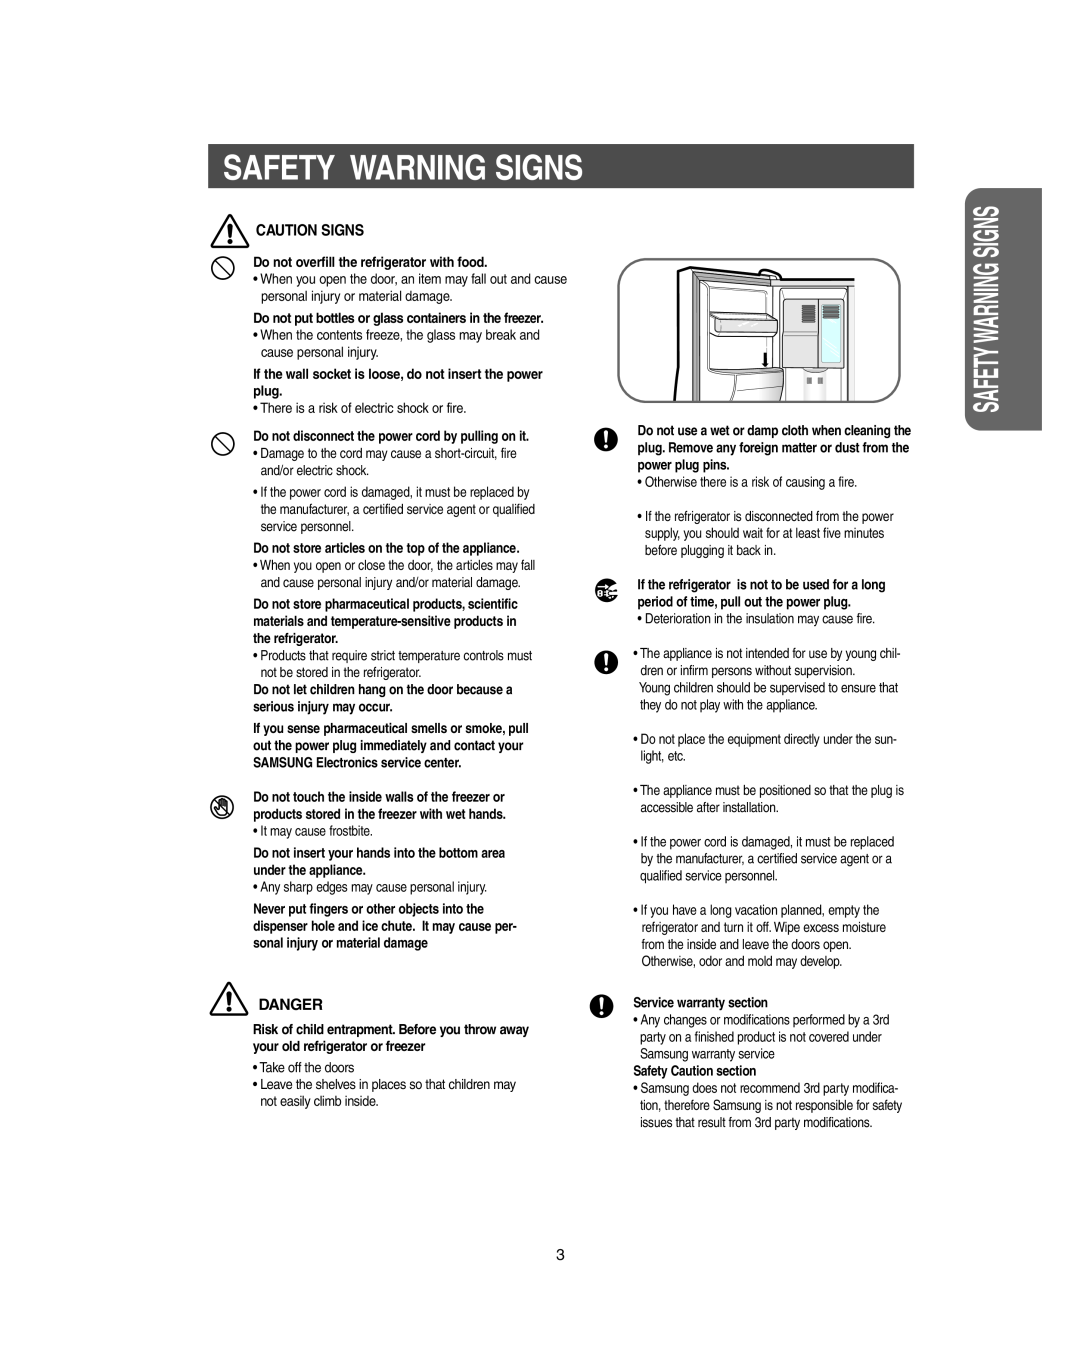 Samsung RS267LBSH owner manual Caution Signs, Danger, Safety Warning Signs, Do not overfill the refrigerator with food 